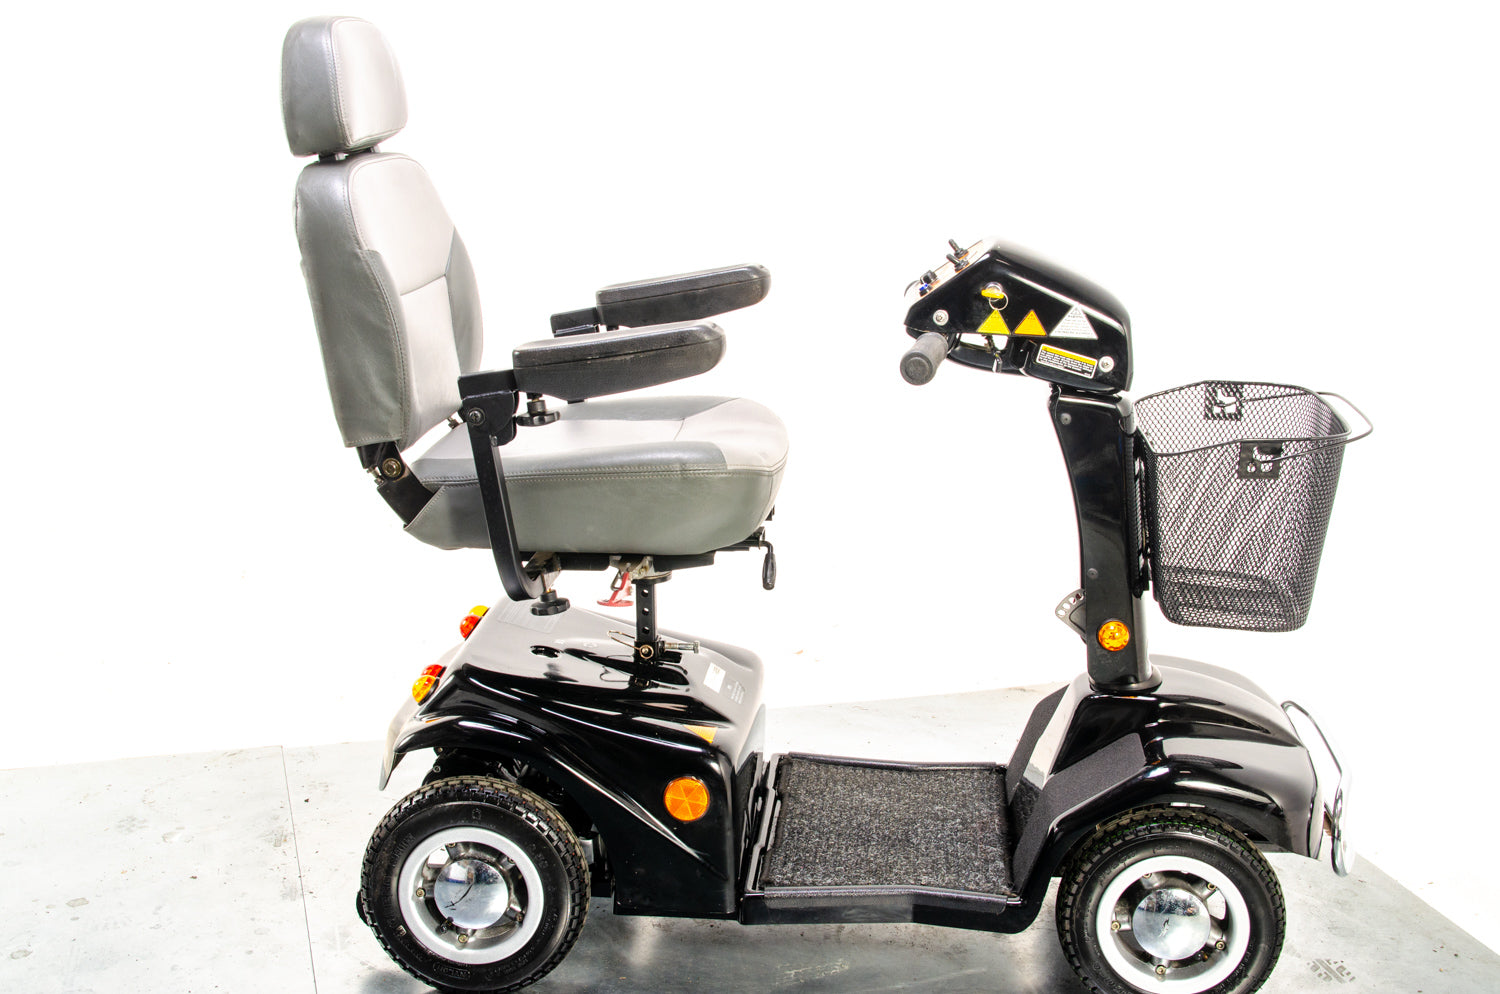 Rascal 388XL All-Terrain Used Electric Mobility Scooter 6mph Road Legal Pavement Comfy Black 13415